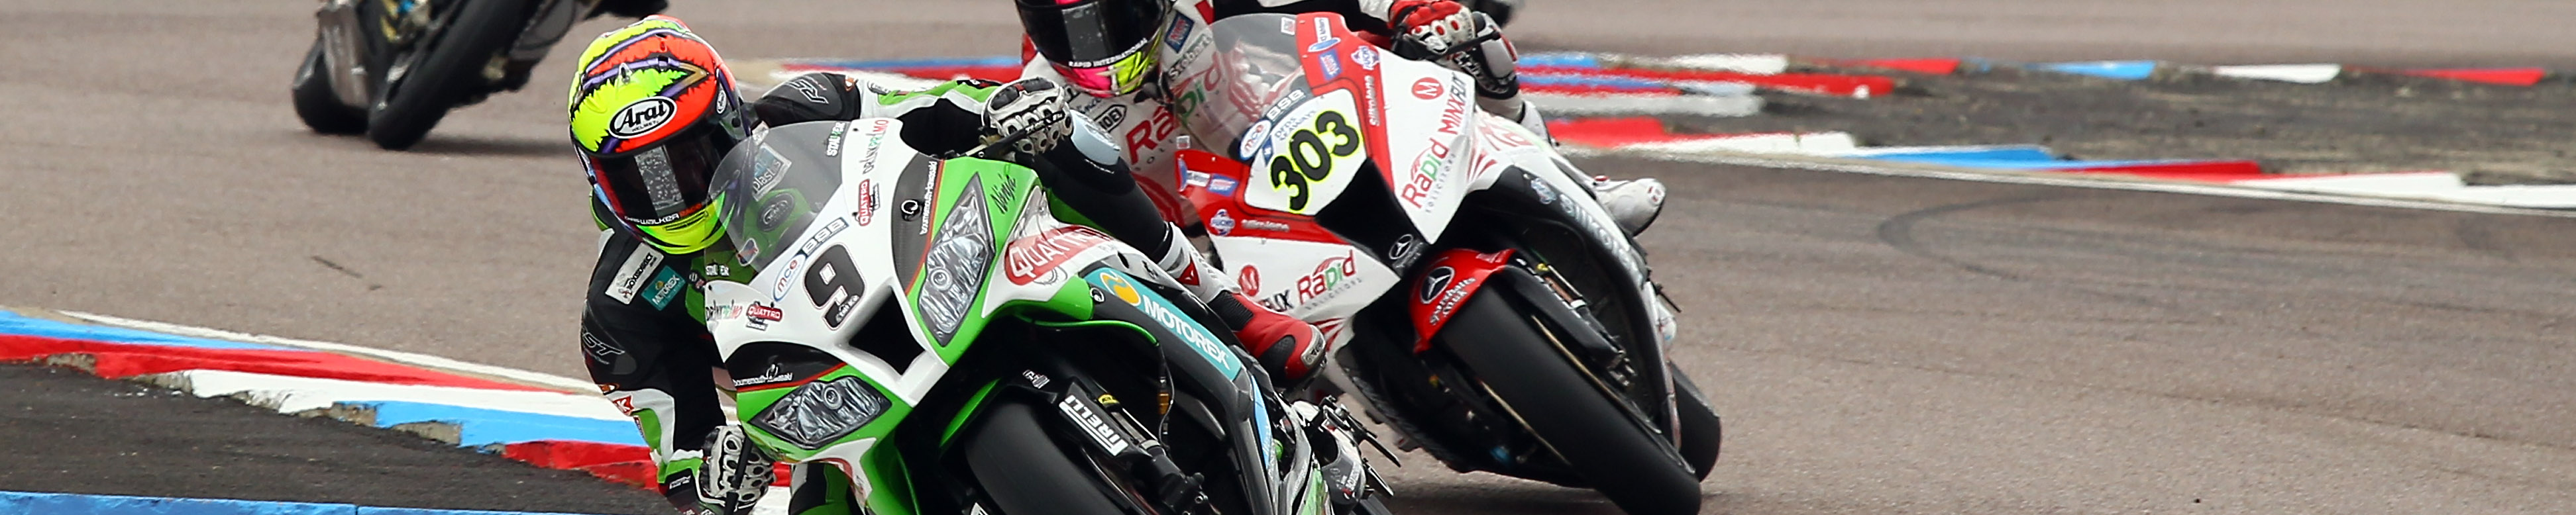 DISASTER FOR ELLISON BUT STAPLEFORD SCORES FIRST BSB POINTS!